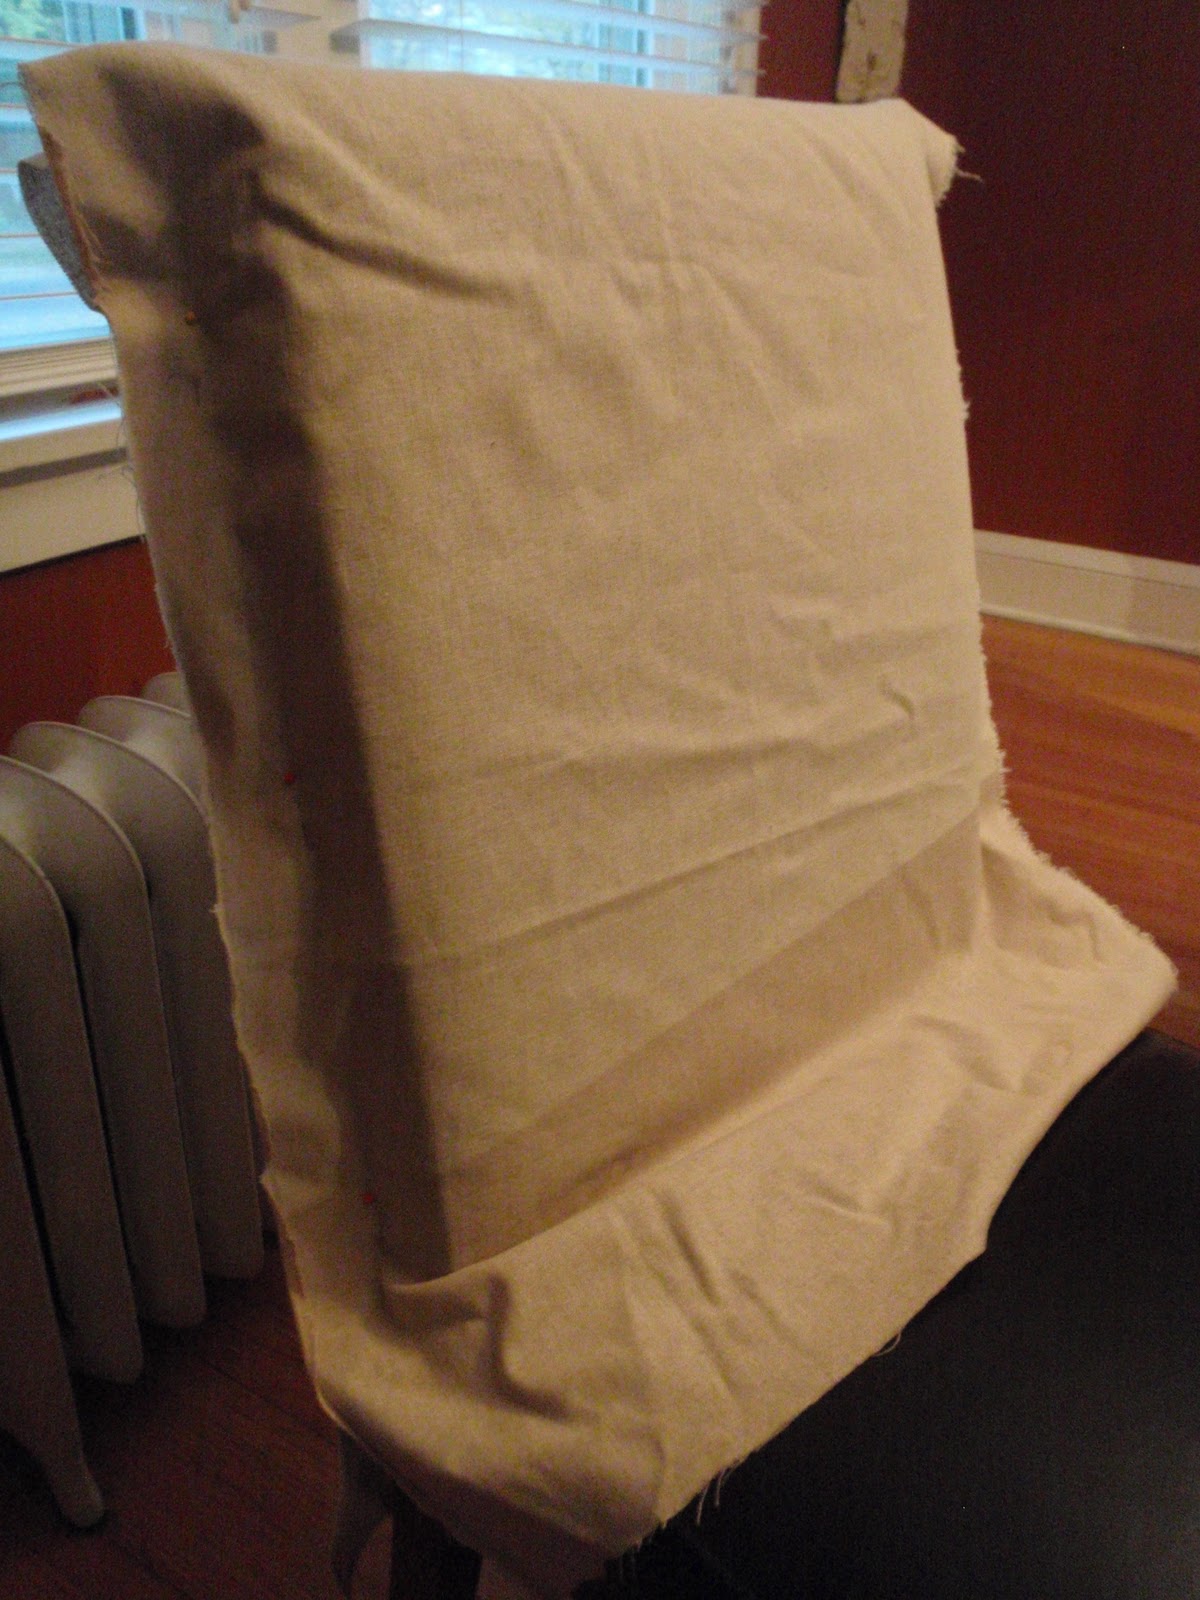 Northman's Party Vamps: DIY Grave Chair Covers